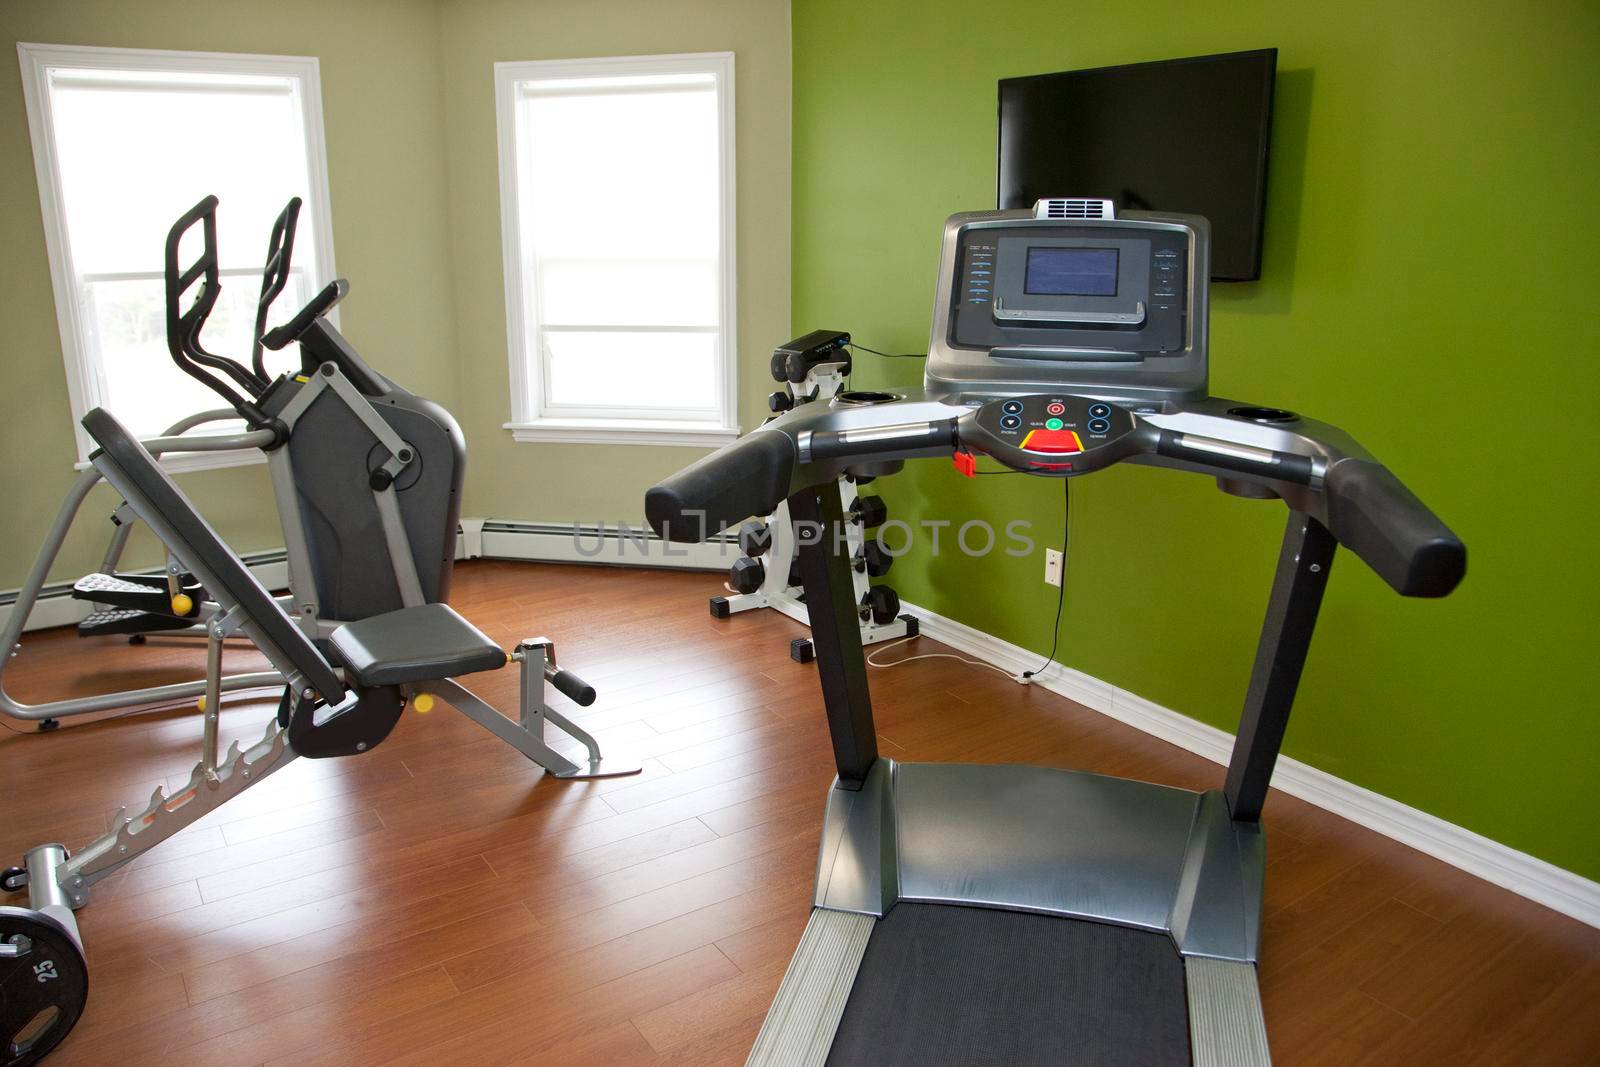 Home treadmill, elliptical and television